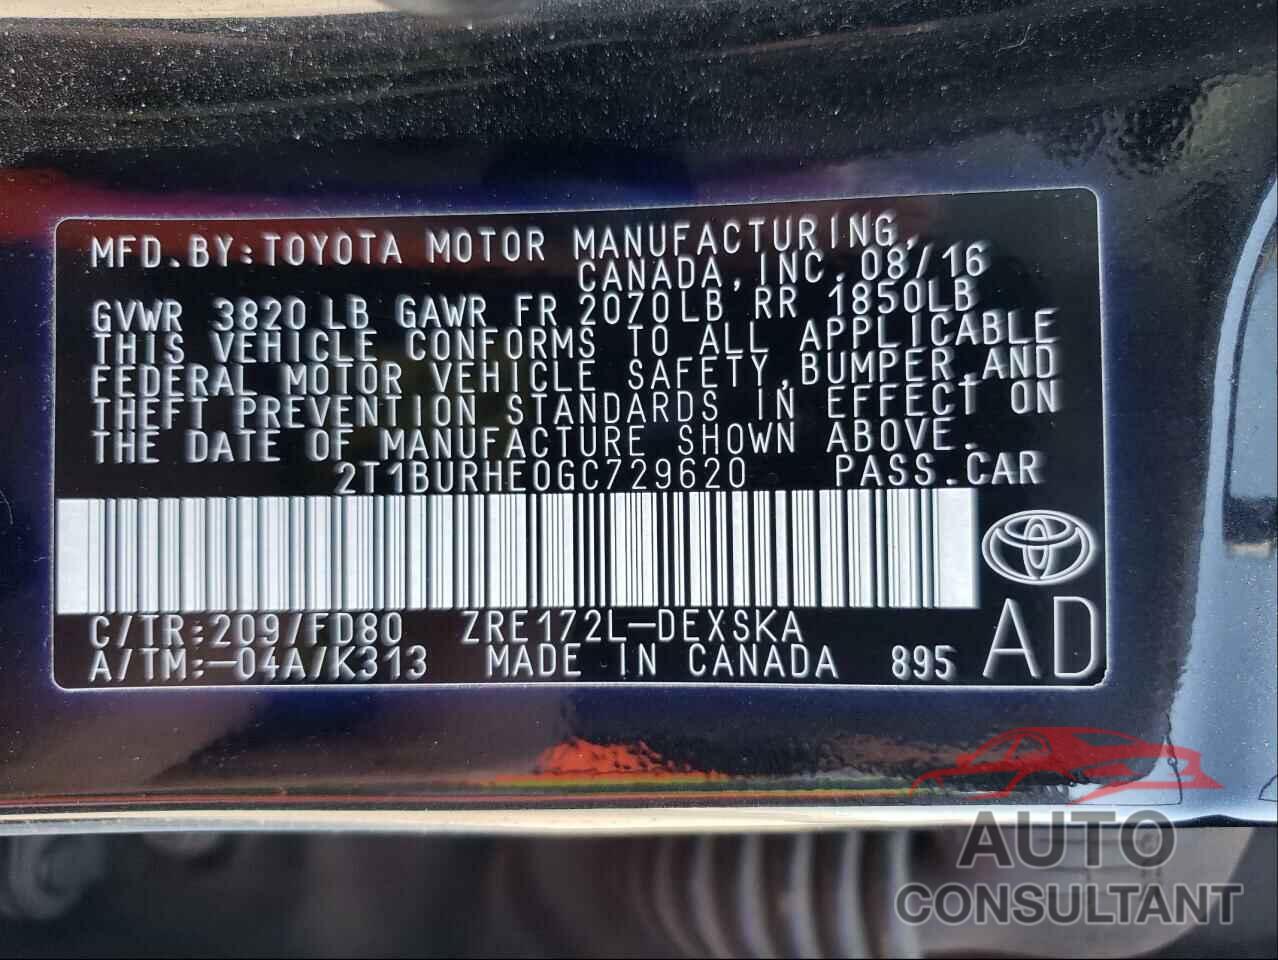 TOYOTA ALL OTHER 2016 - 2T1BURHE0GC729620